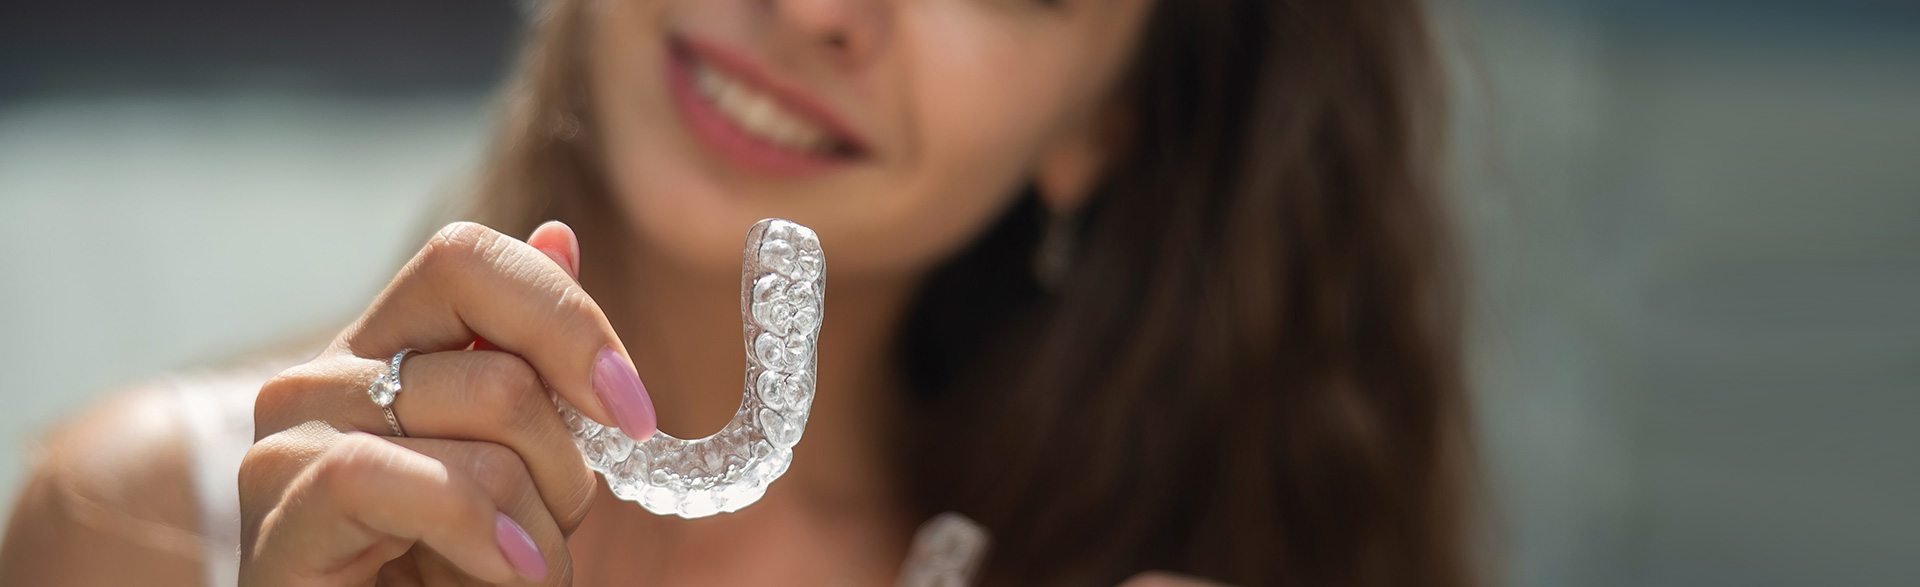 Invisalign at Arsmiles Family & Cosmetic Dentistry, Fairlawn